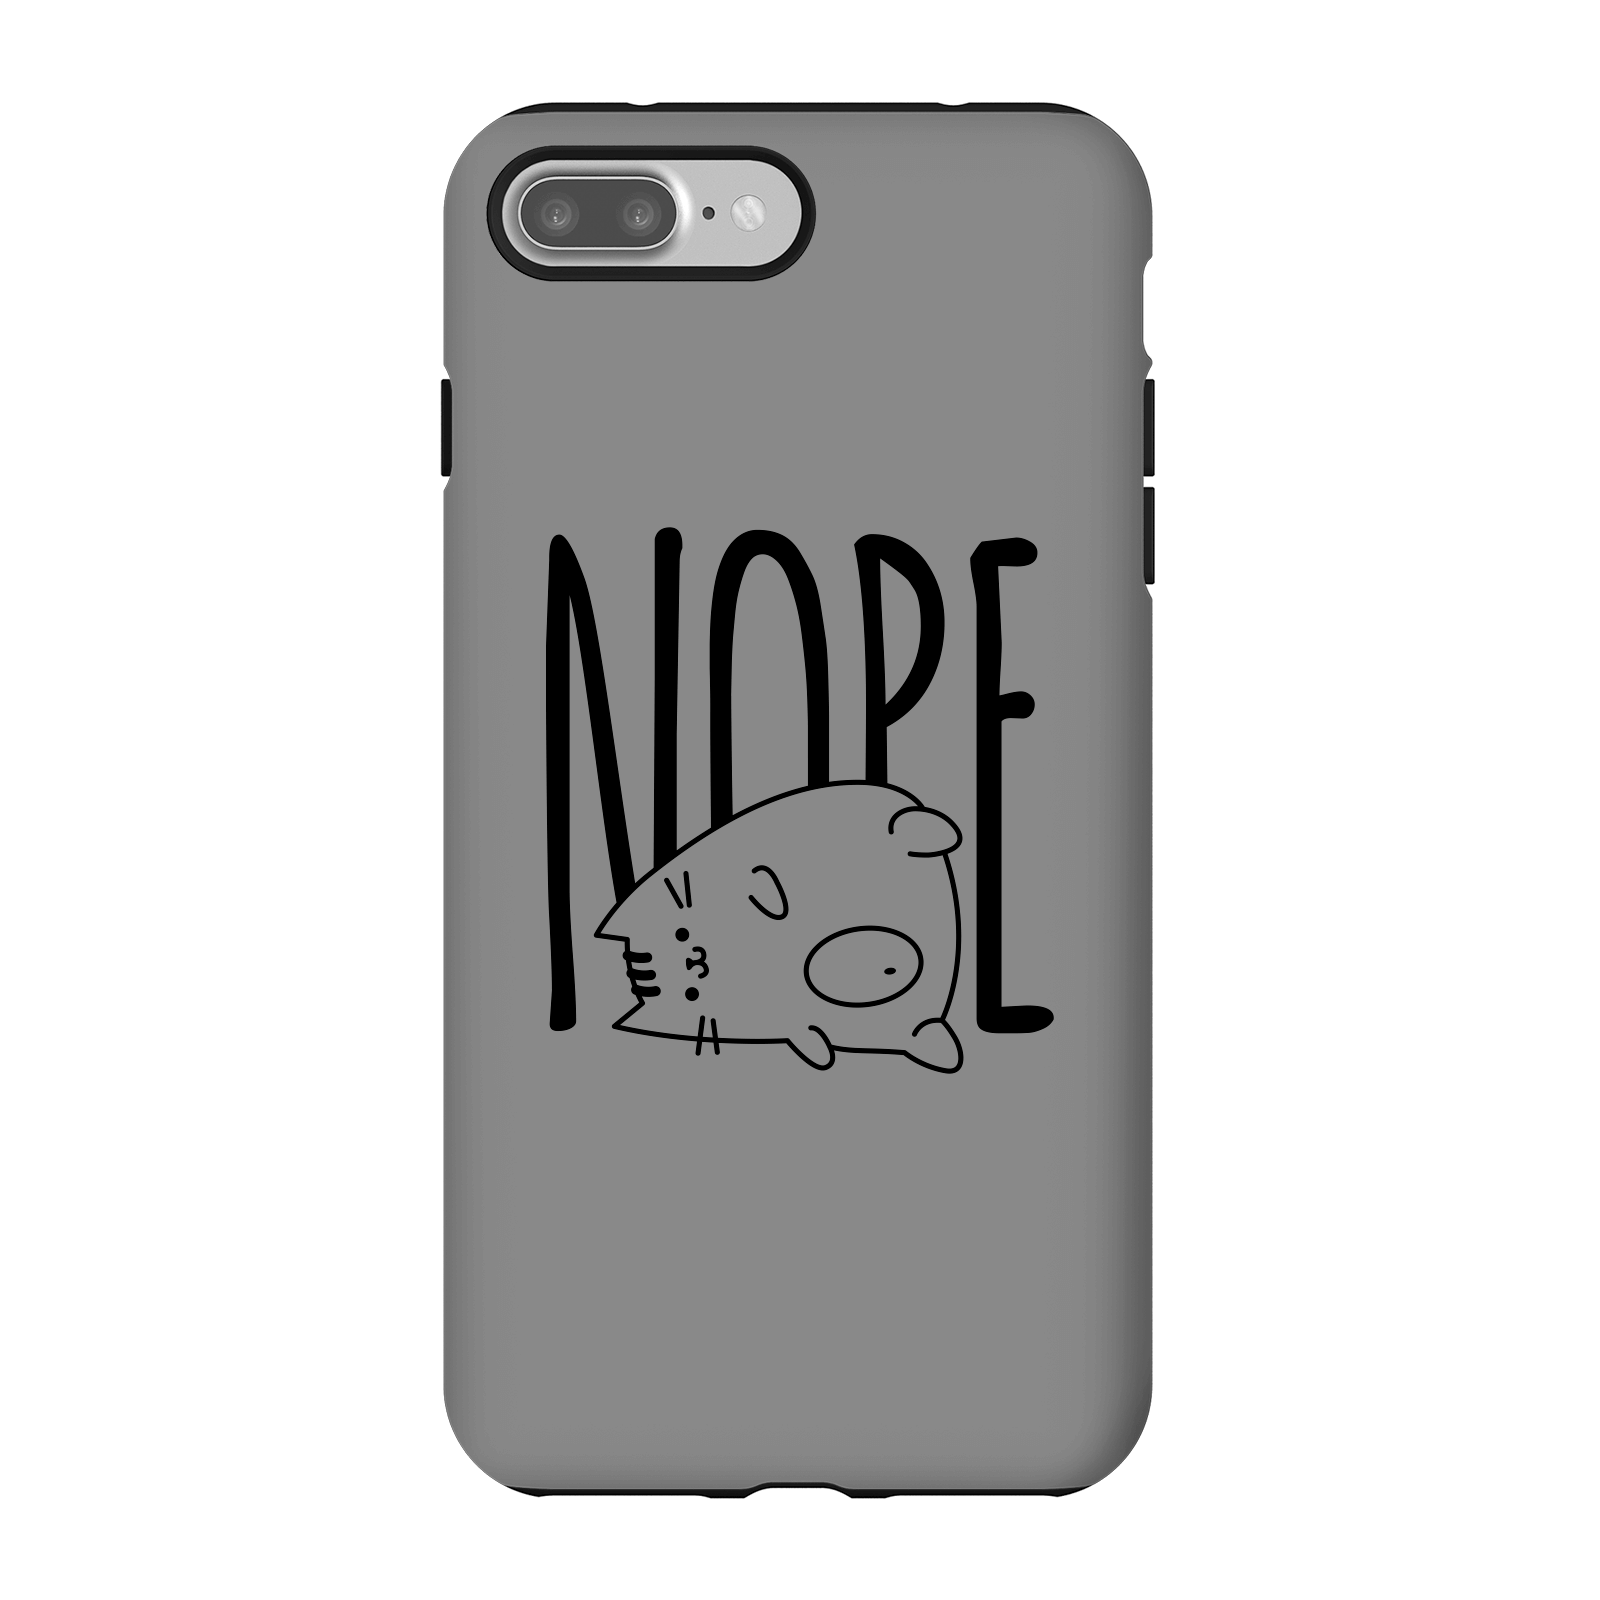 Nope Phone Case for iPhone and Android - iPhone 7 Plus - Tough Case - Gloss